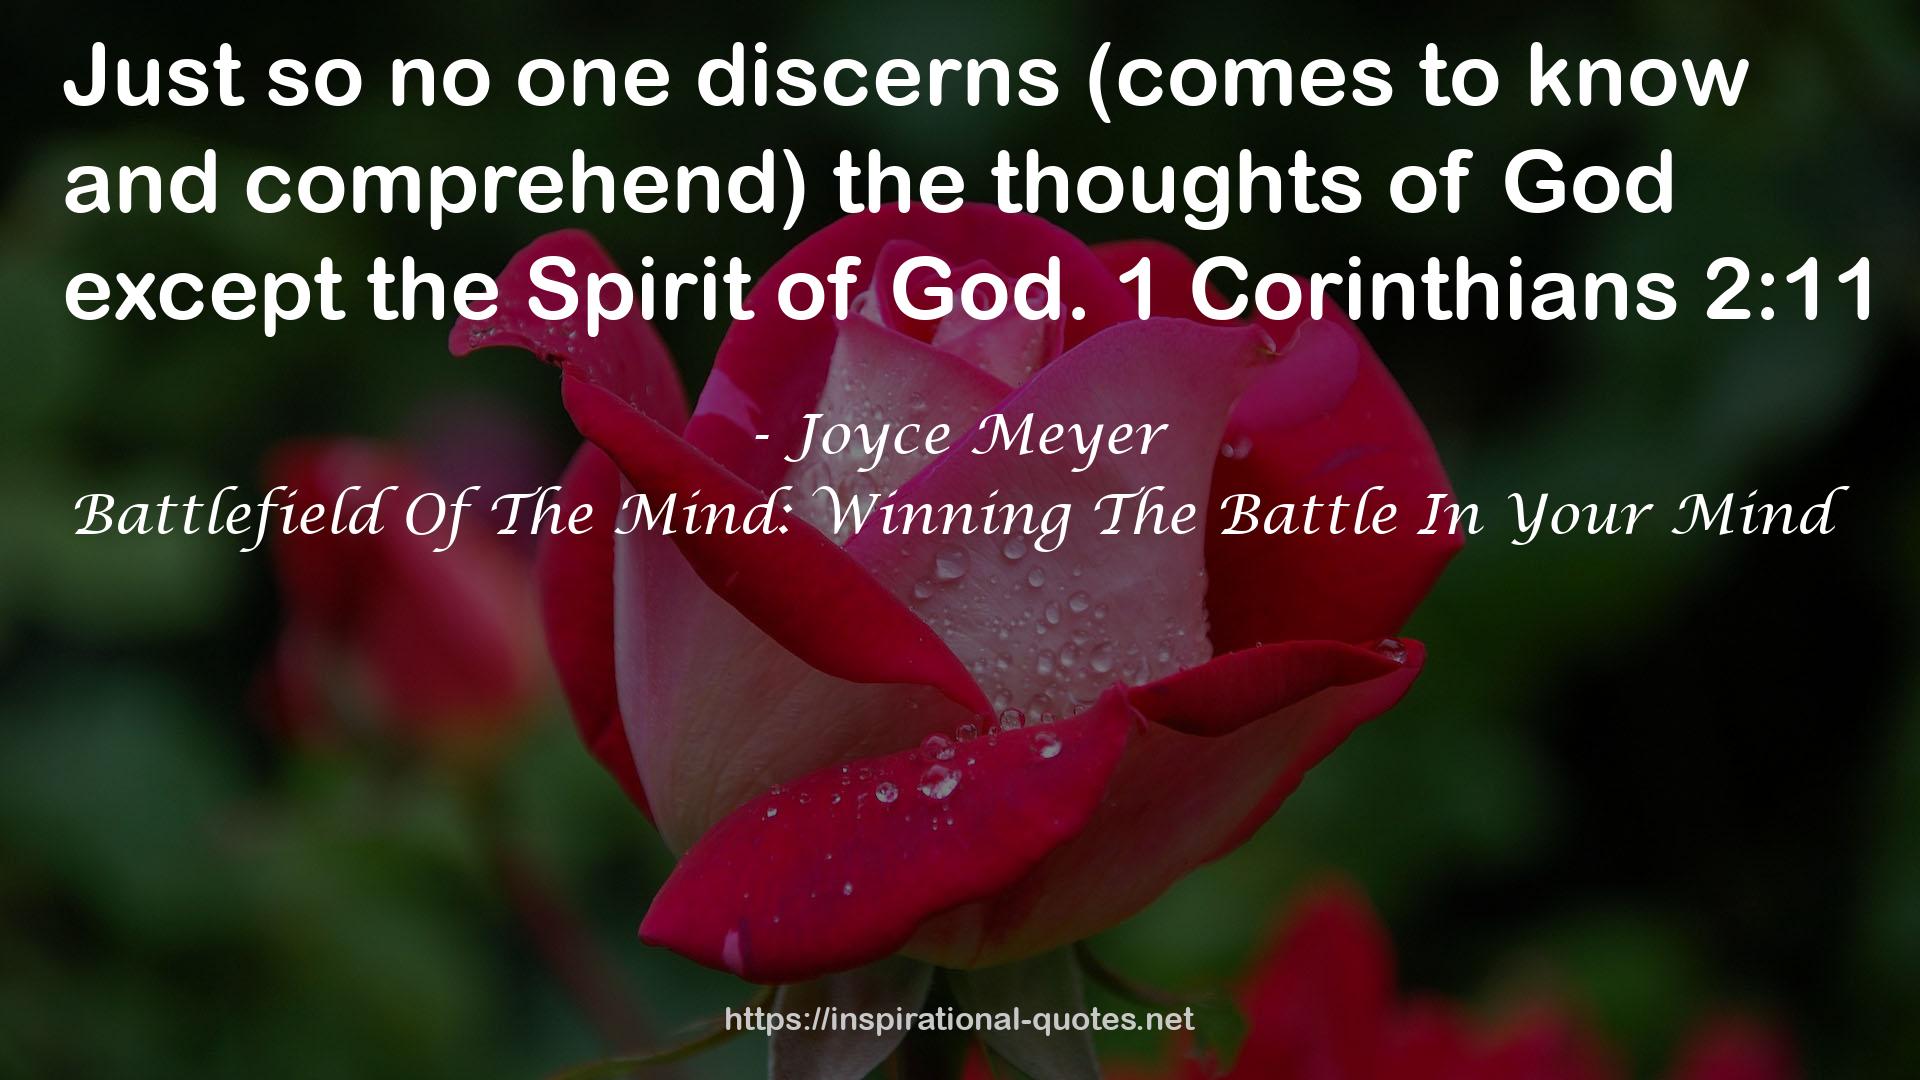 Battlefield Of The Mind: Winning The Battle In Your Mind QUOTES